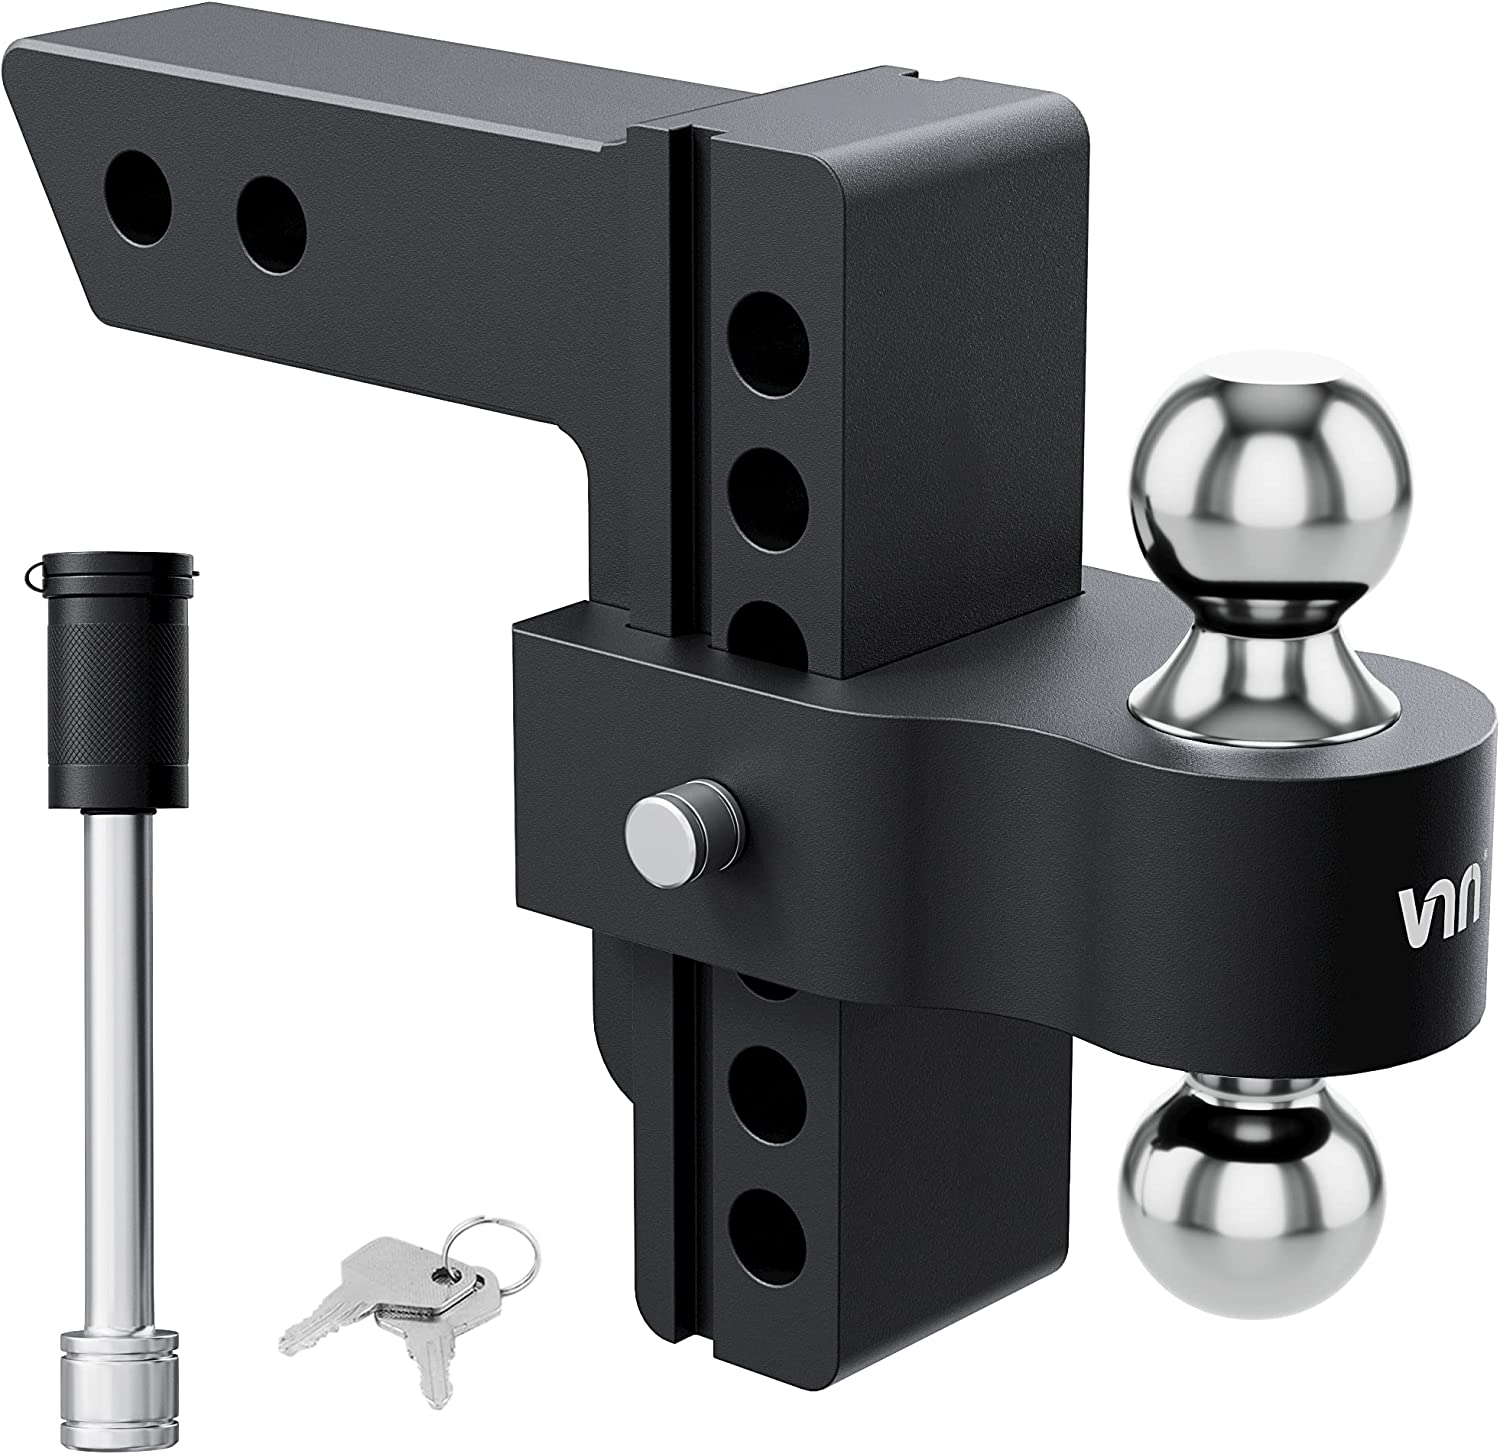 Wholesale Vnn Adjustable Trailer Hitch Fits 2 Inch Receiver Only 6